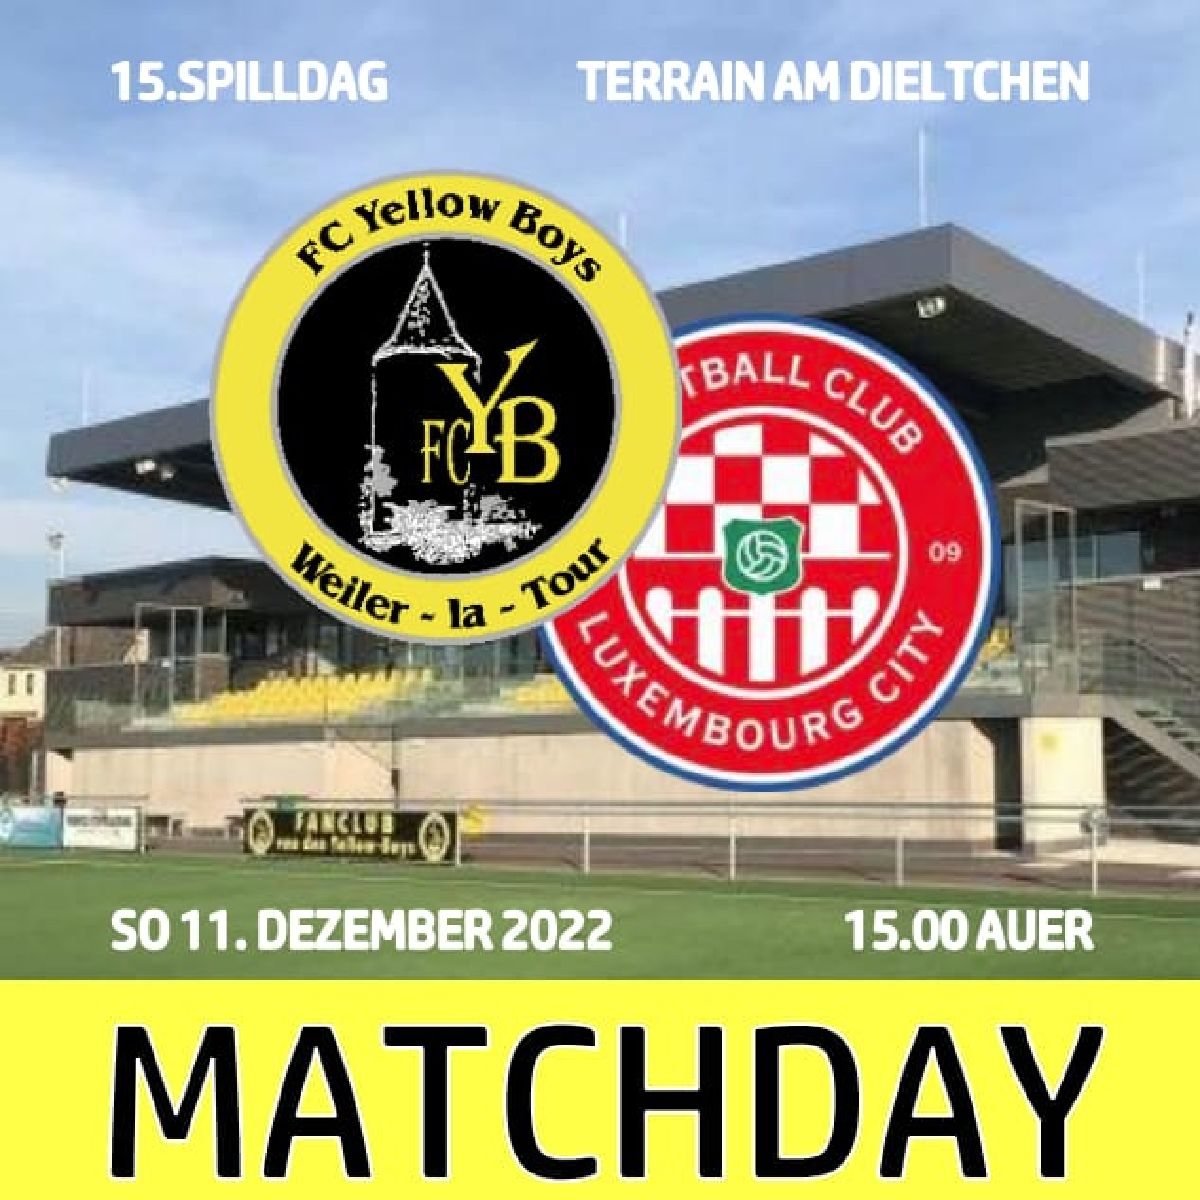 +++ MATCHDAY: WEILER - LUXEMBOURG CITY +++